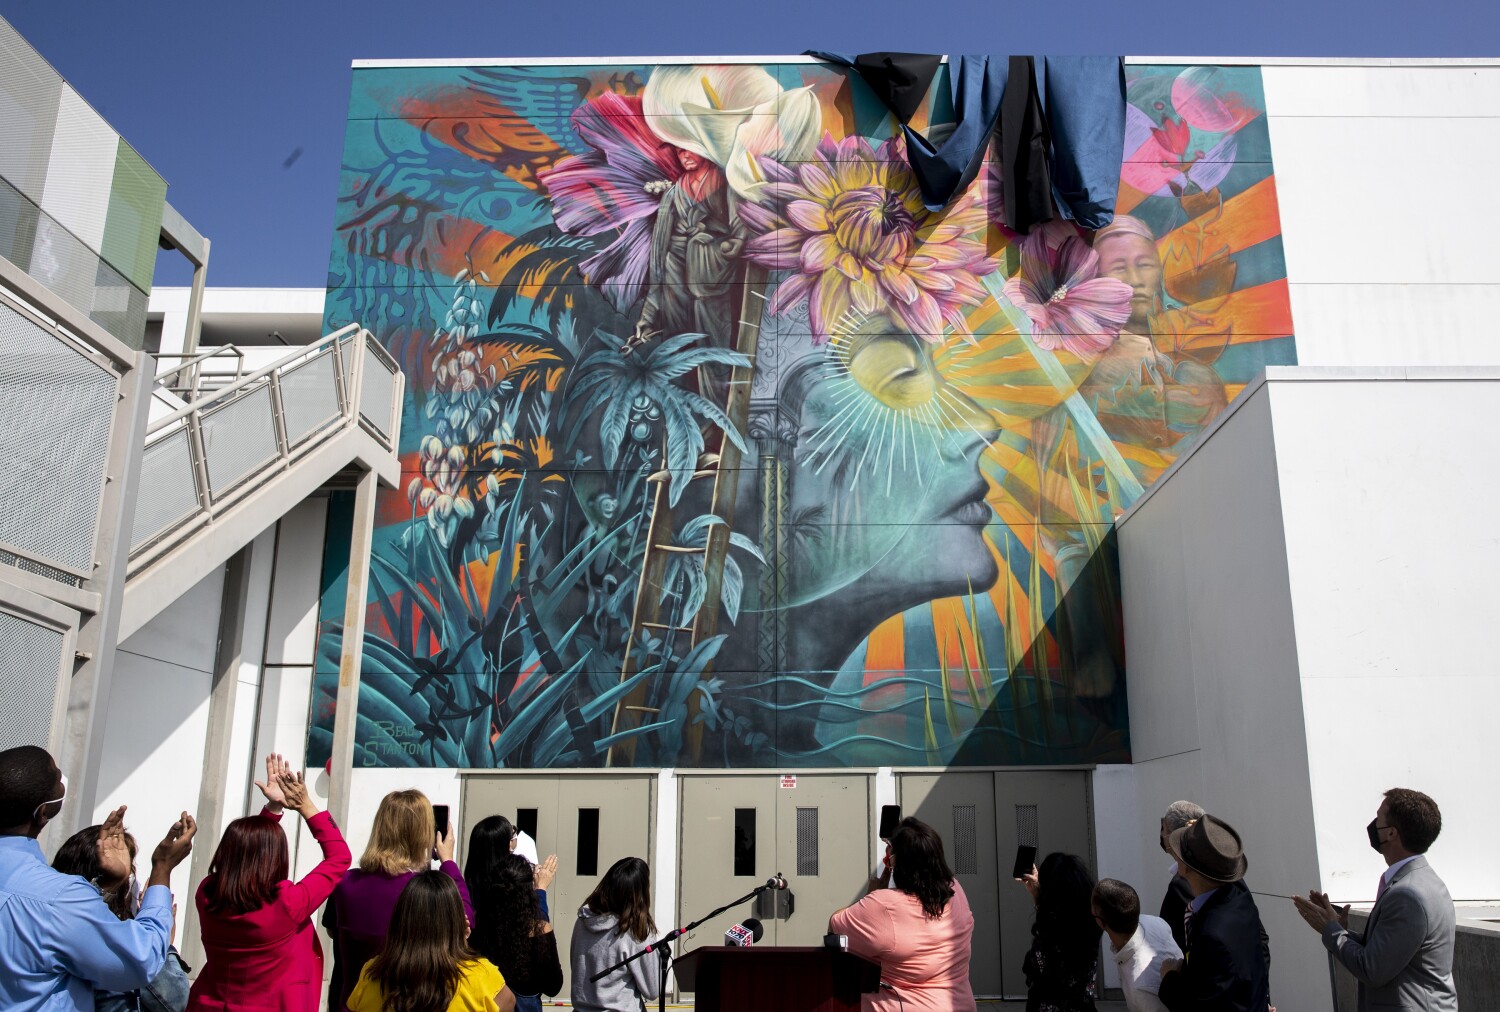 School mural is transformed after original offended some Korean Americans